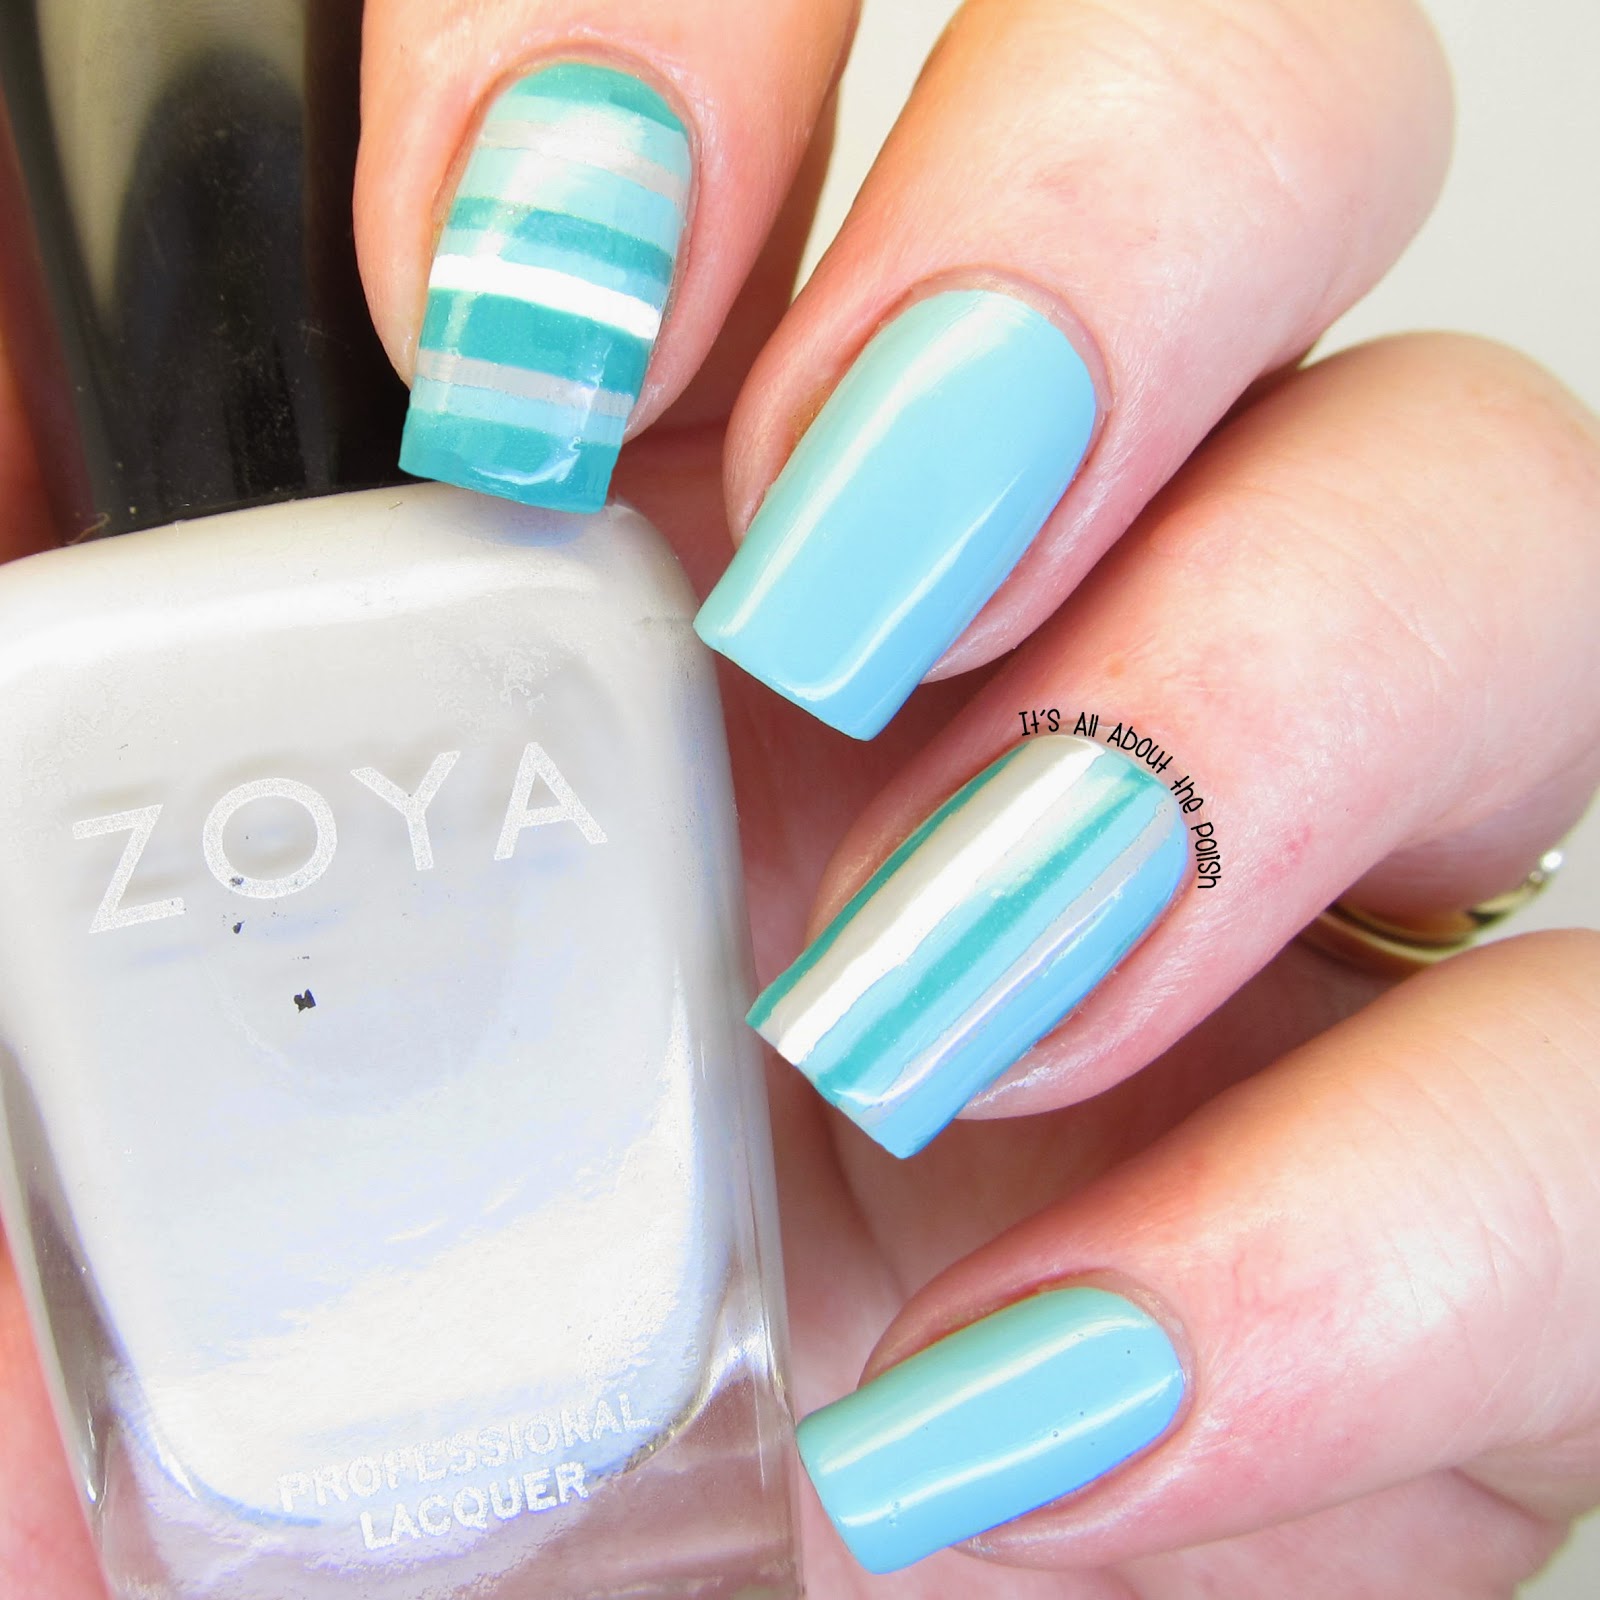 It's all about the polish: NOTD Green, white and grey stripe nail design.